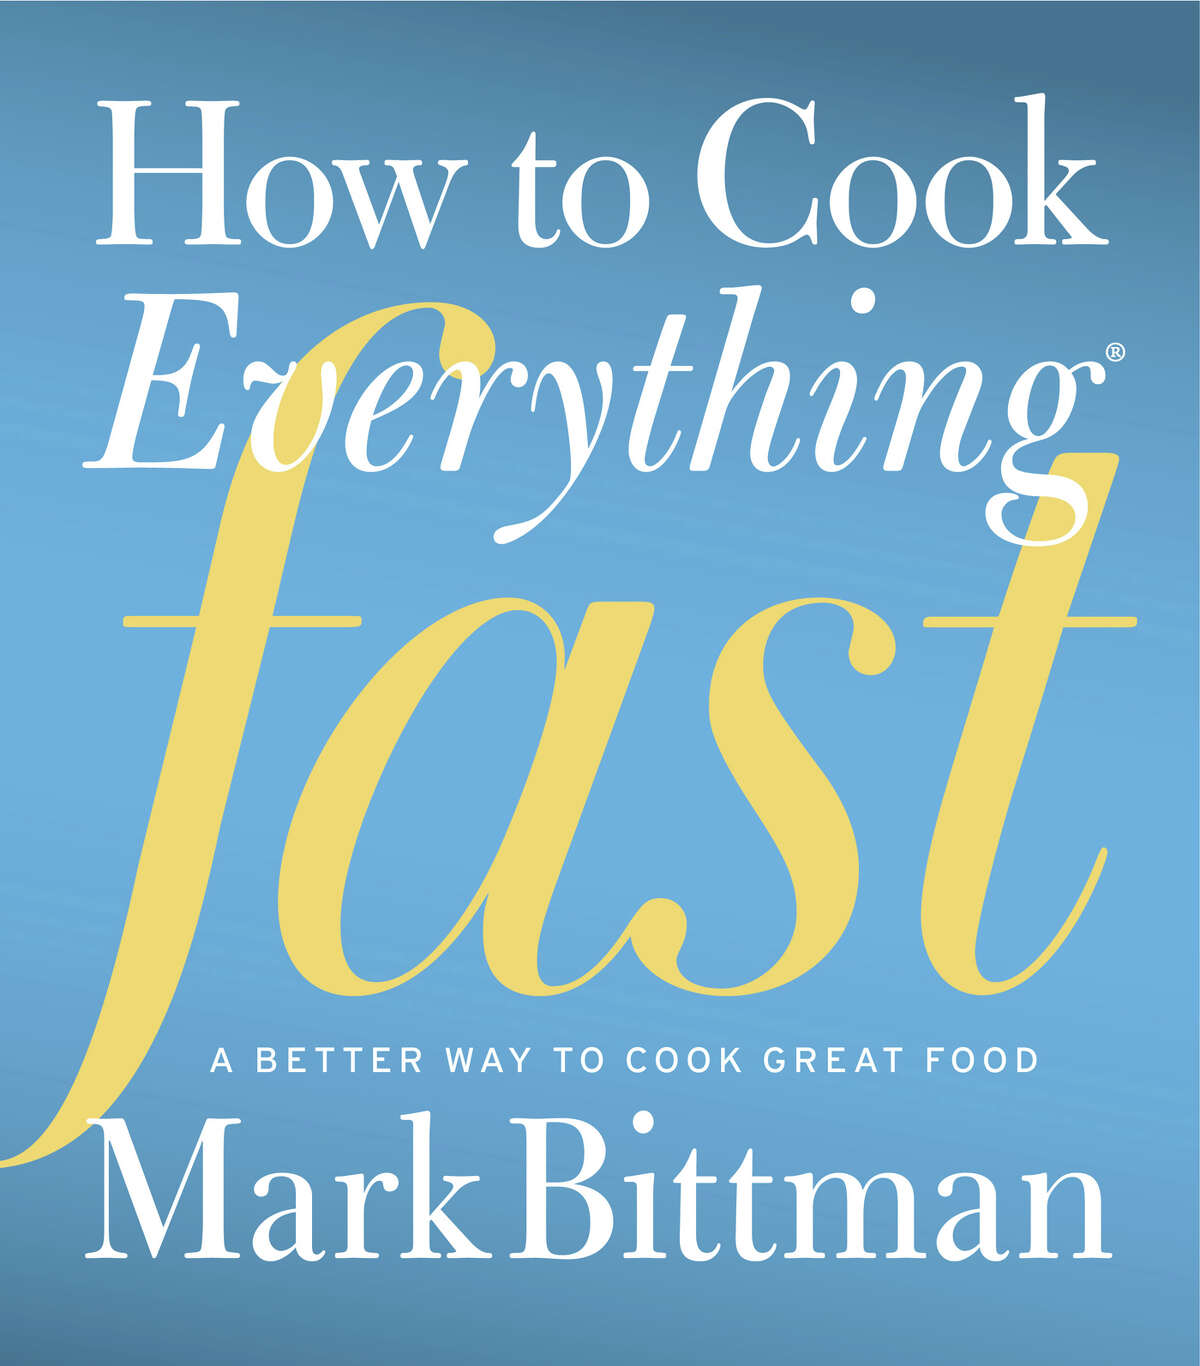 mark bittman how to cook everything fast